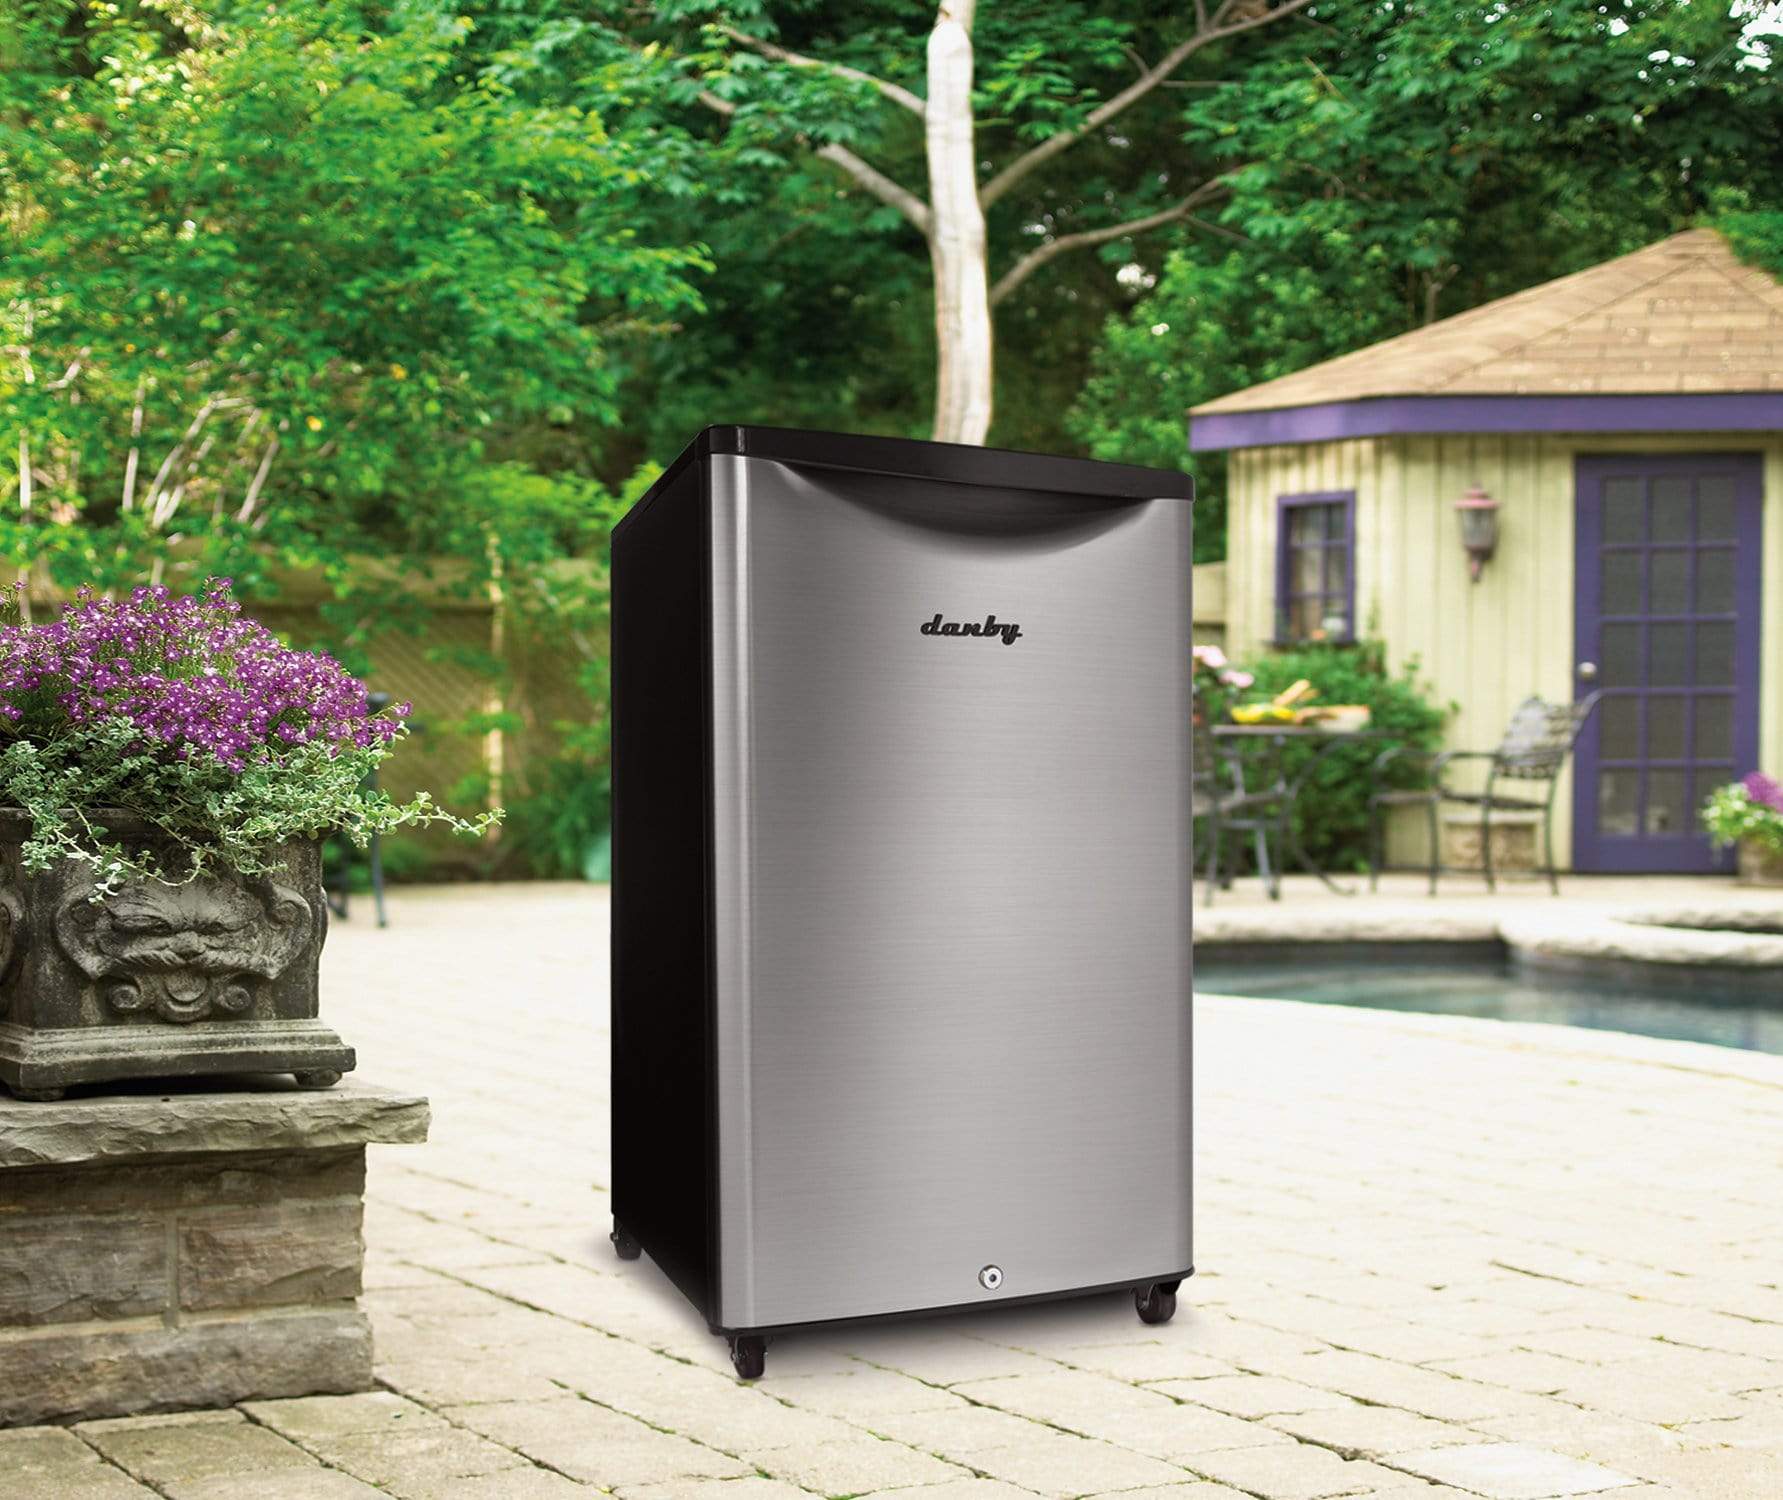 Danby Compact Danby - 4.4 CuFt. Contemporary Classic Outdoor Compact Refrigerator